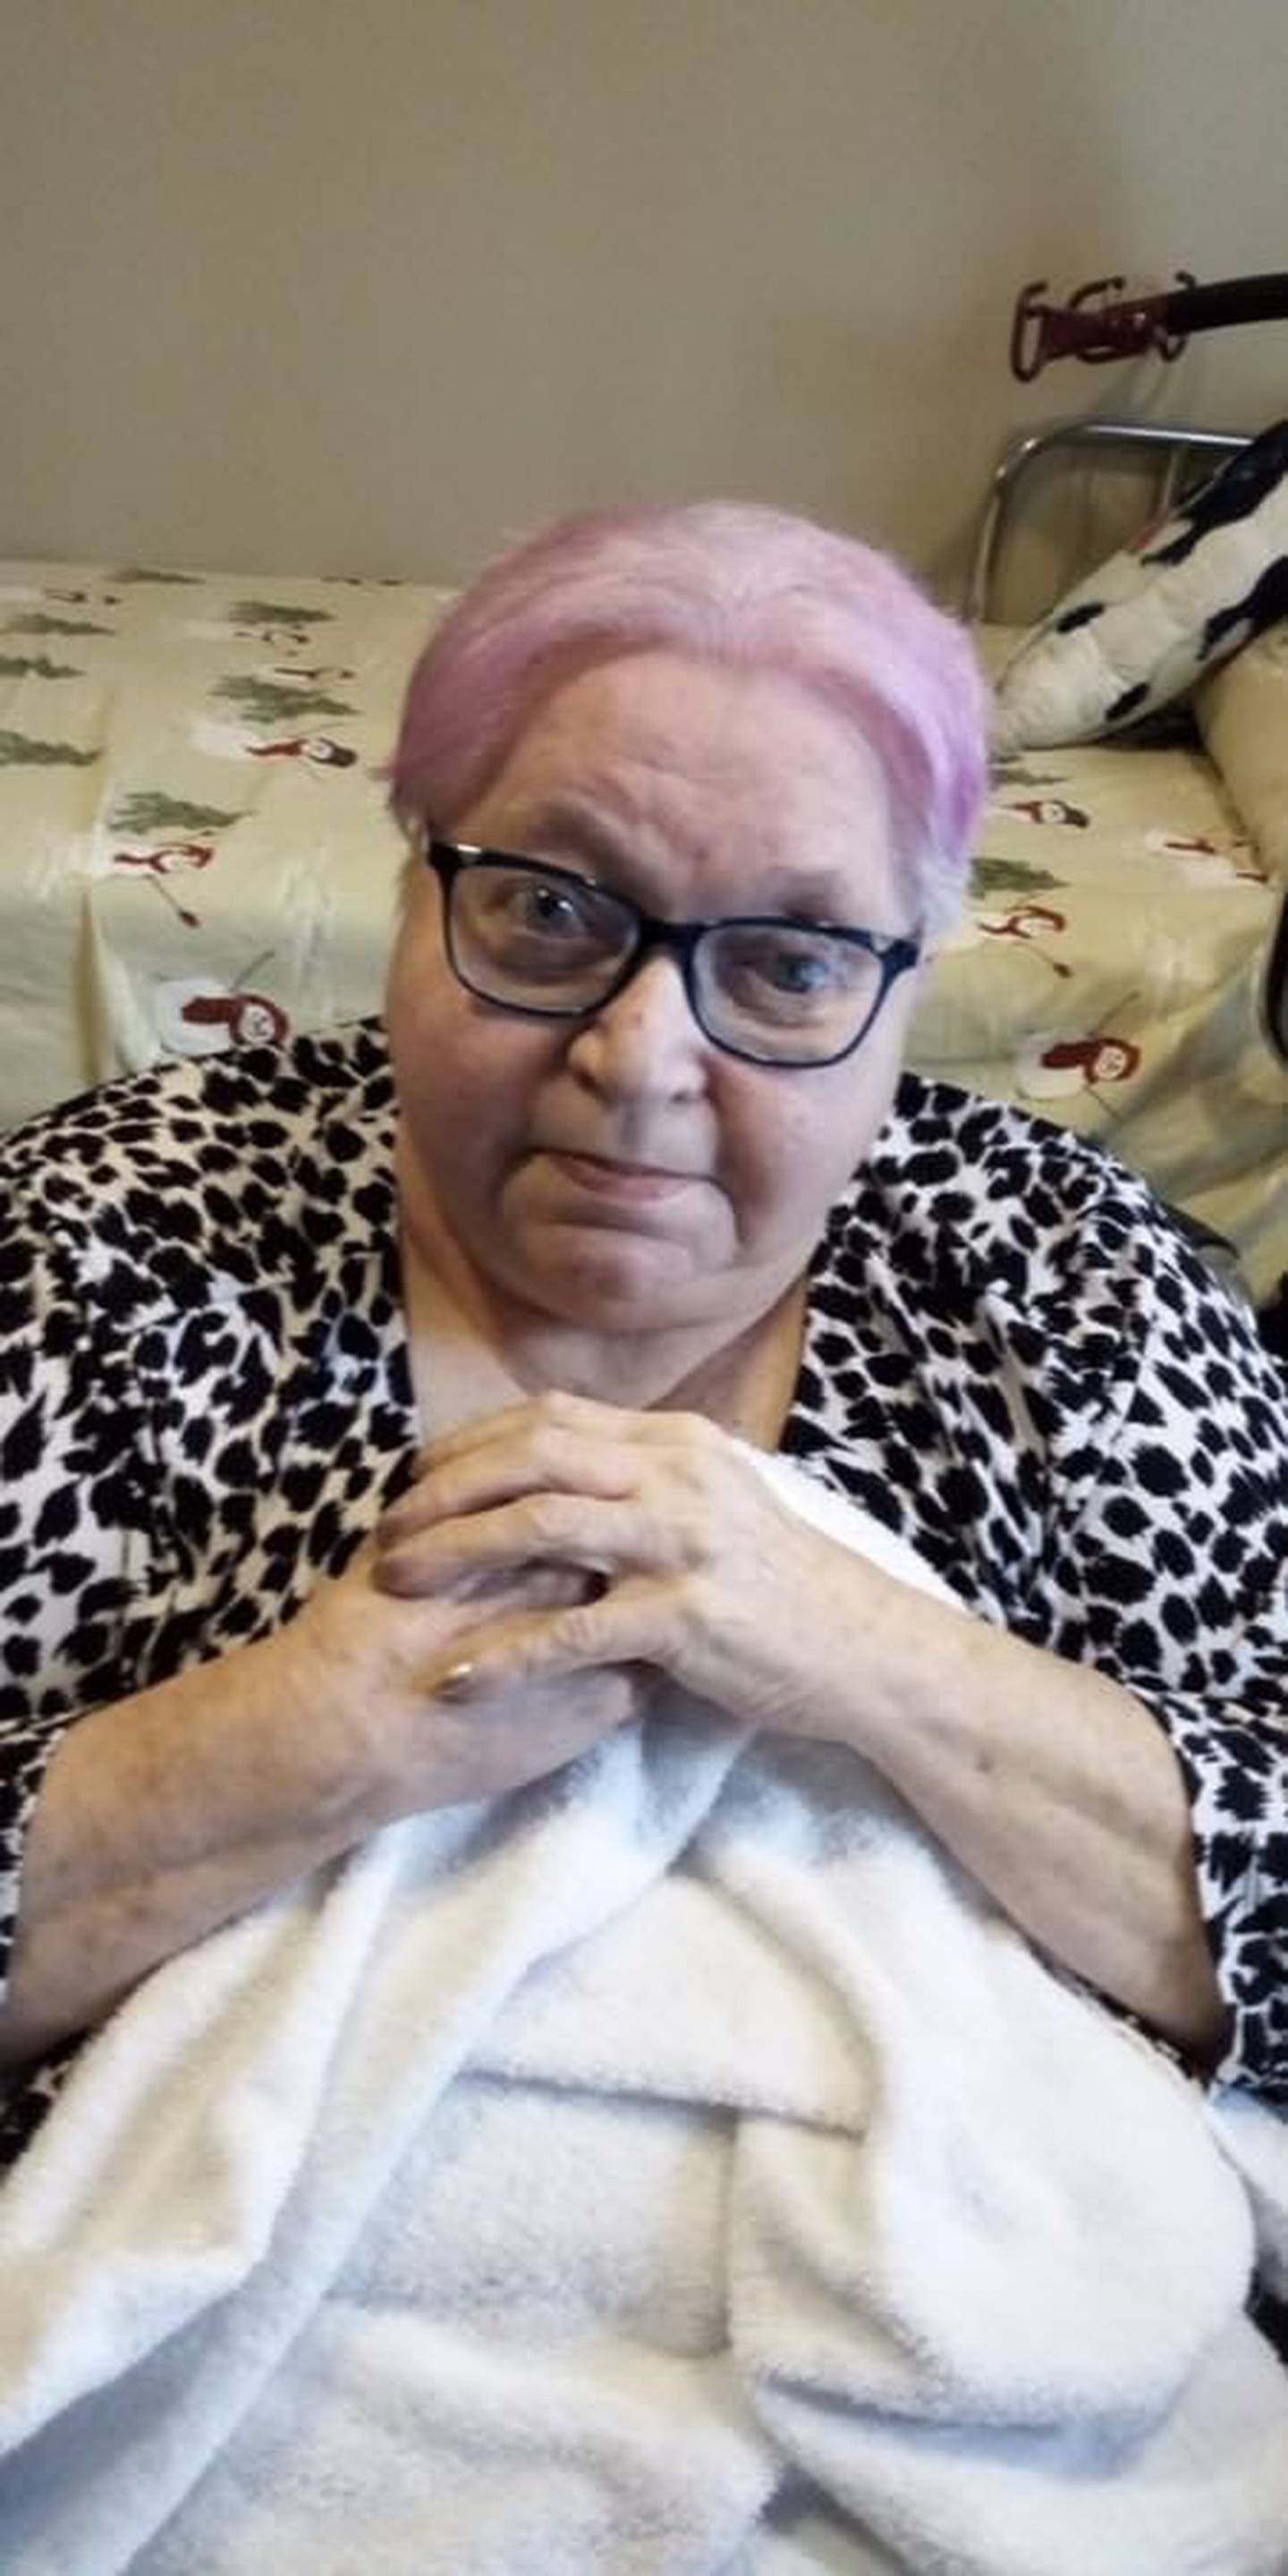 Carol Juricic, formerly of Wilmington, is seen with the pink hair she loved one month before she died from COVID-19 pneumonia. Carol and her husband Paul (deceased) foster more than 250 children over 25 years.